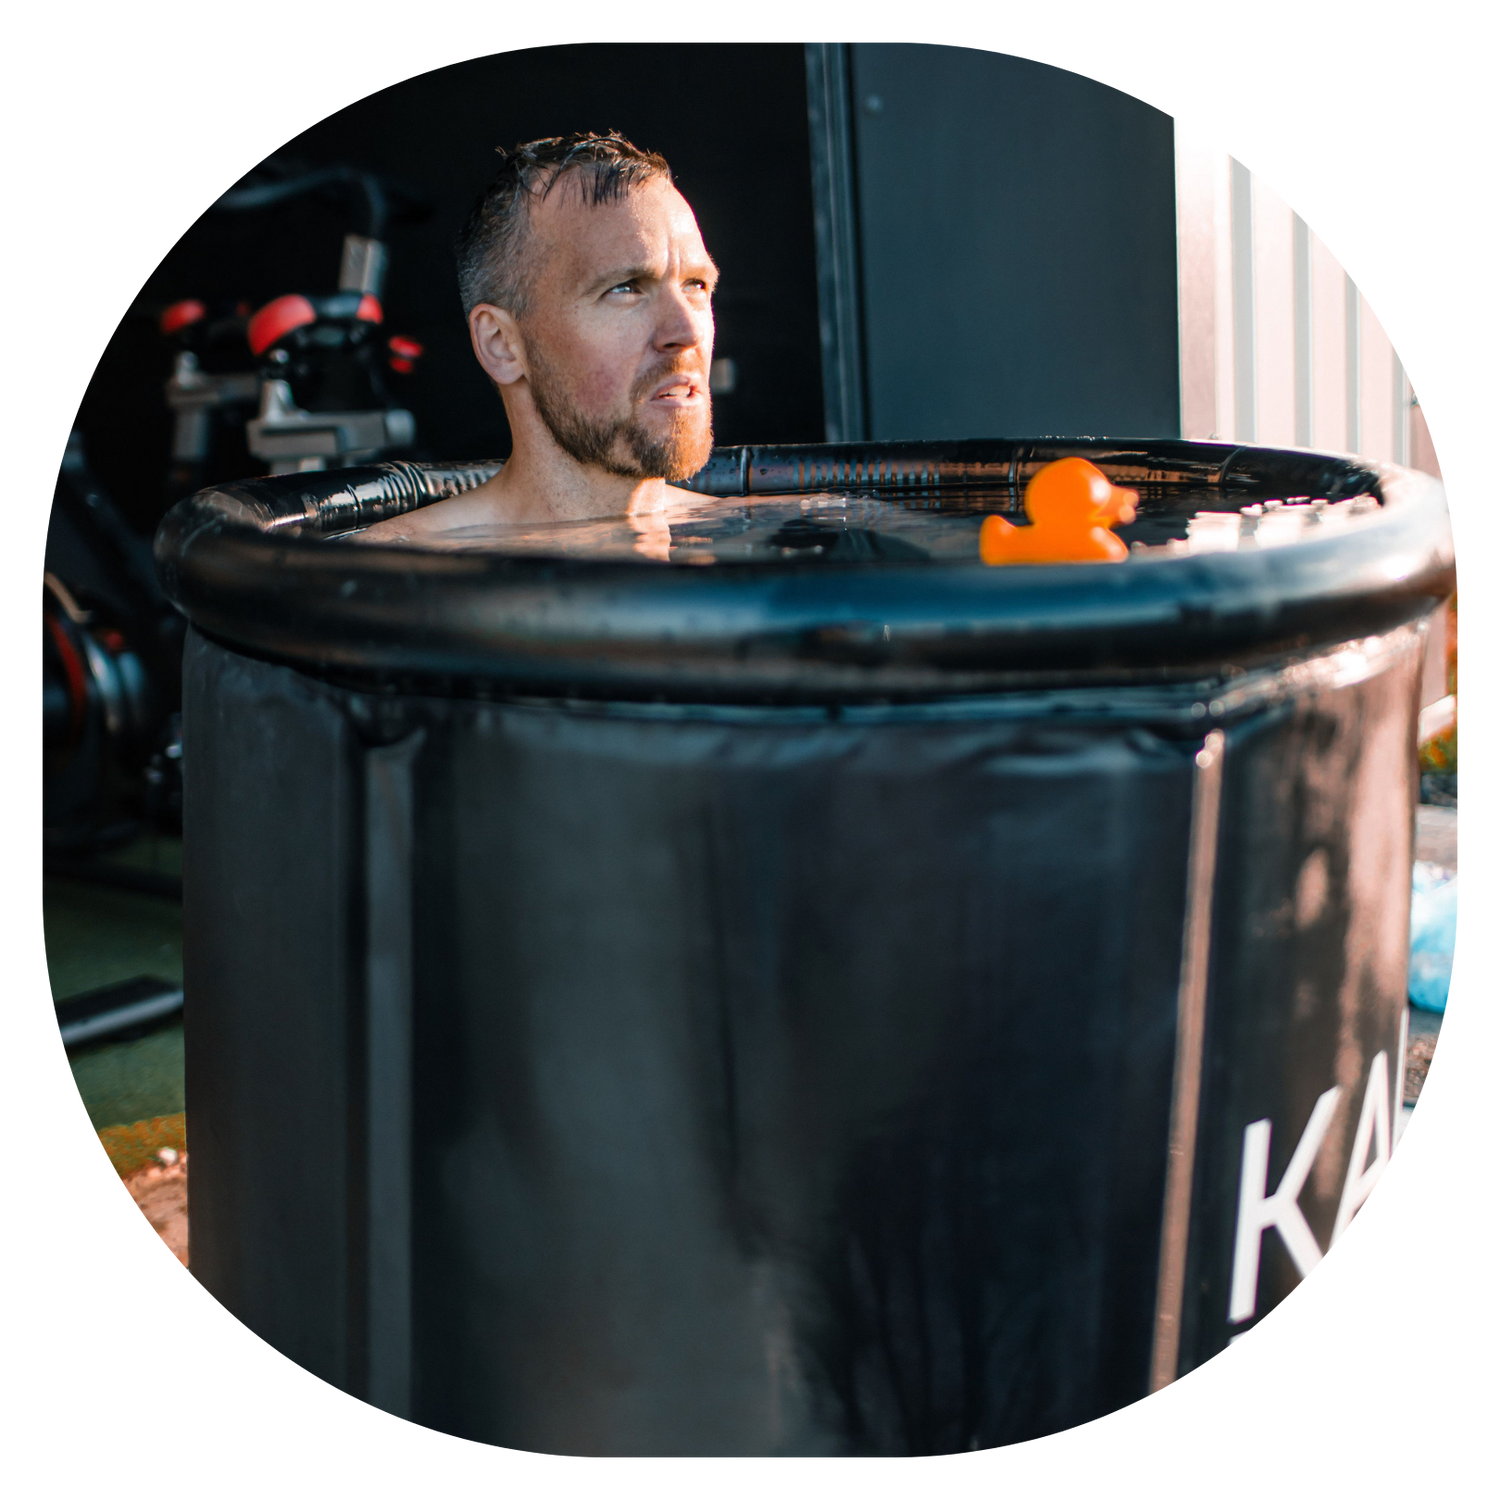 KAL Recovery Ice Bath Muscle Recovery